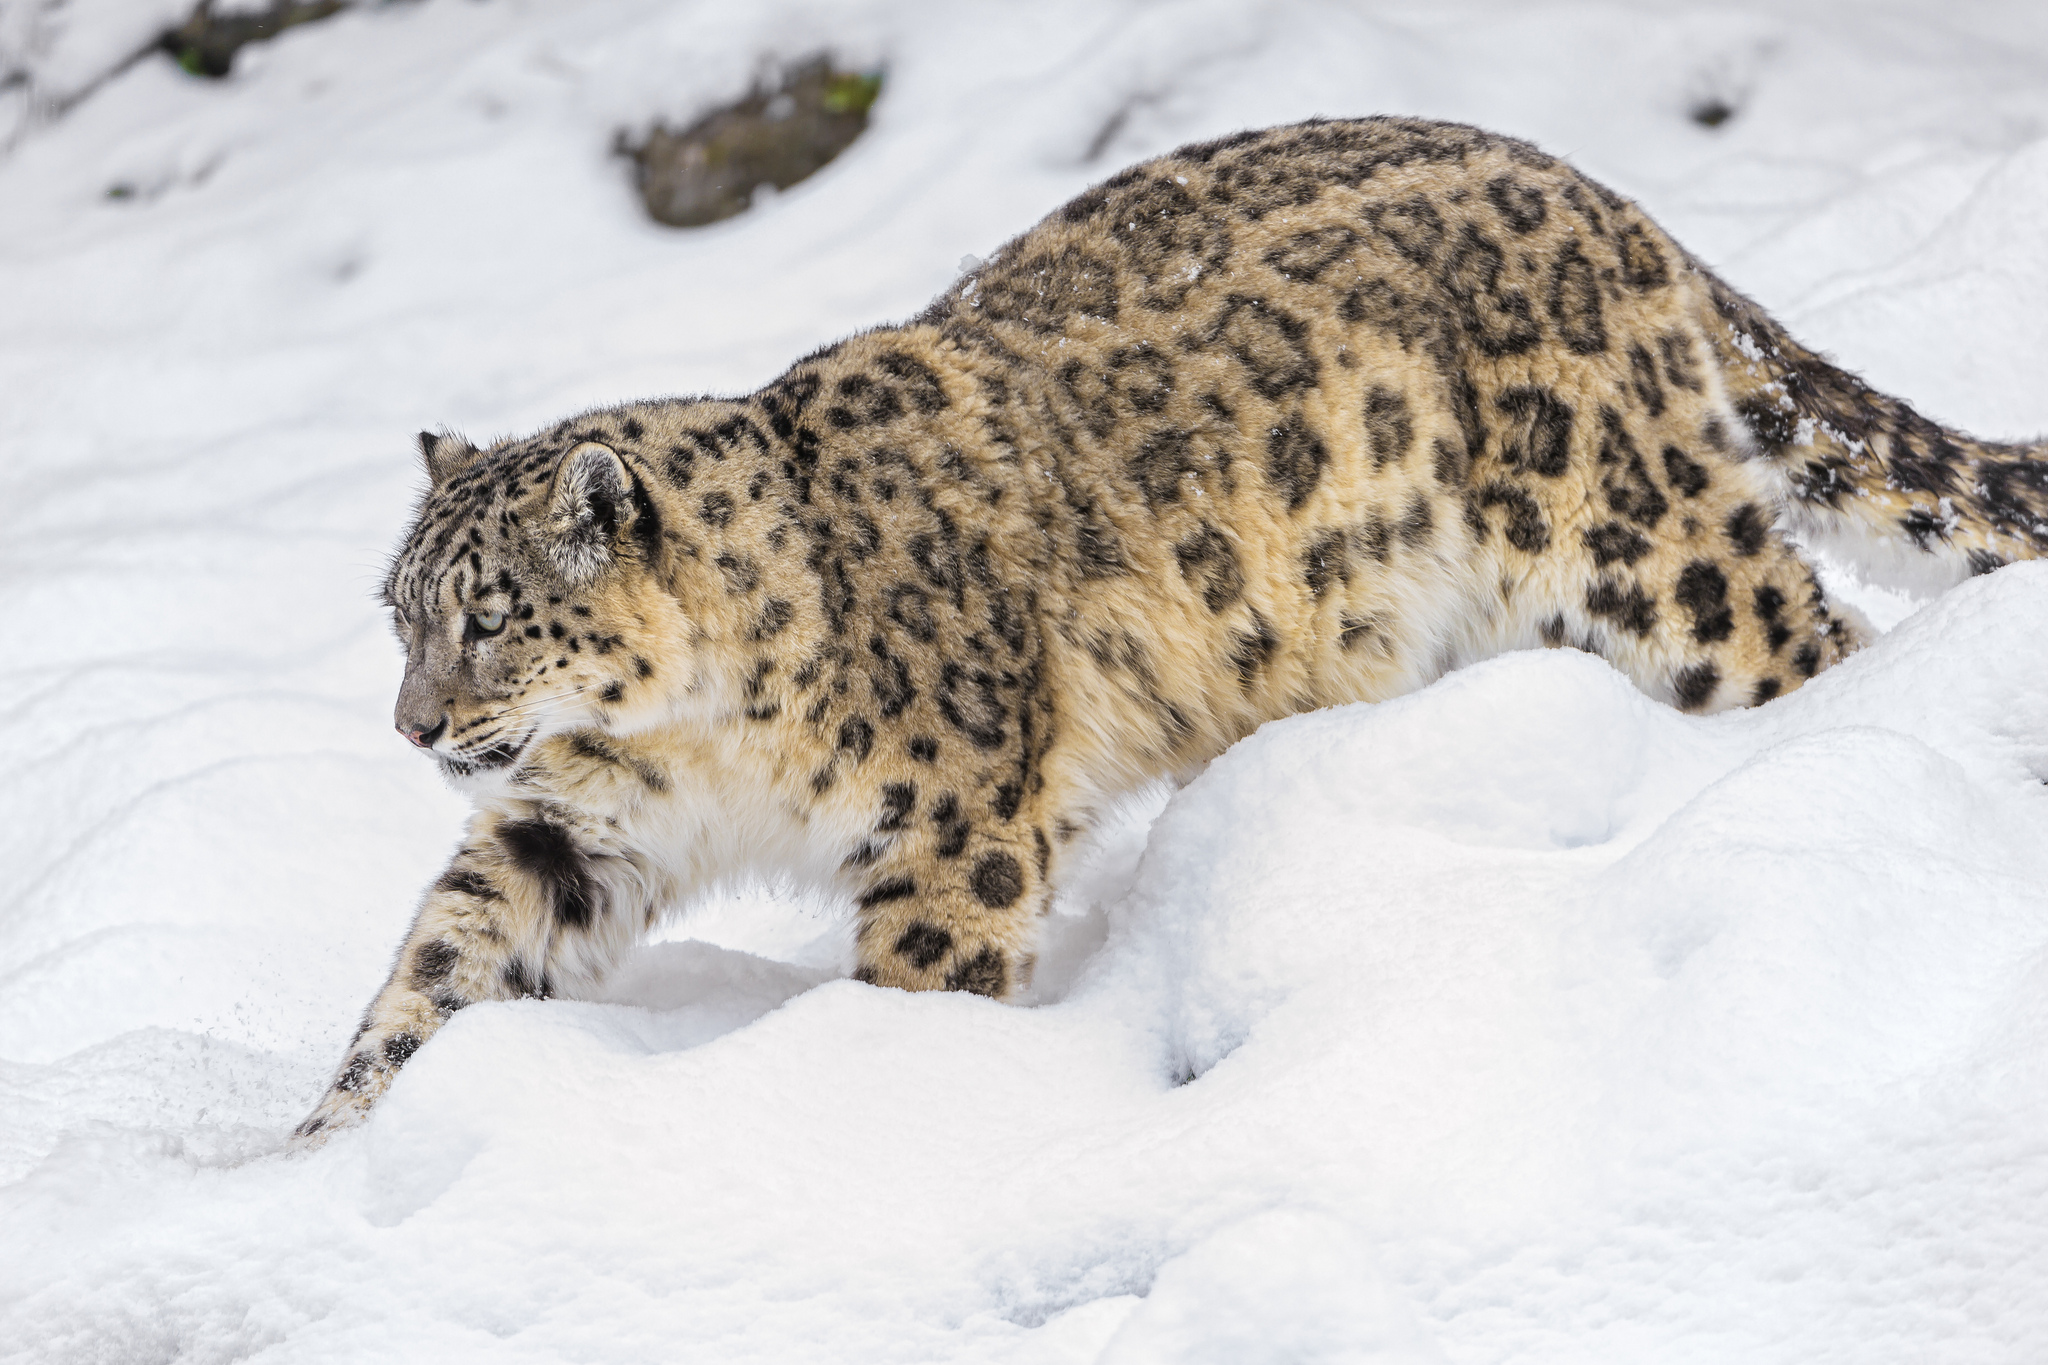 The Snow Leopard's Shift from “Endangered” to “Vulnerable”: Explained